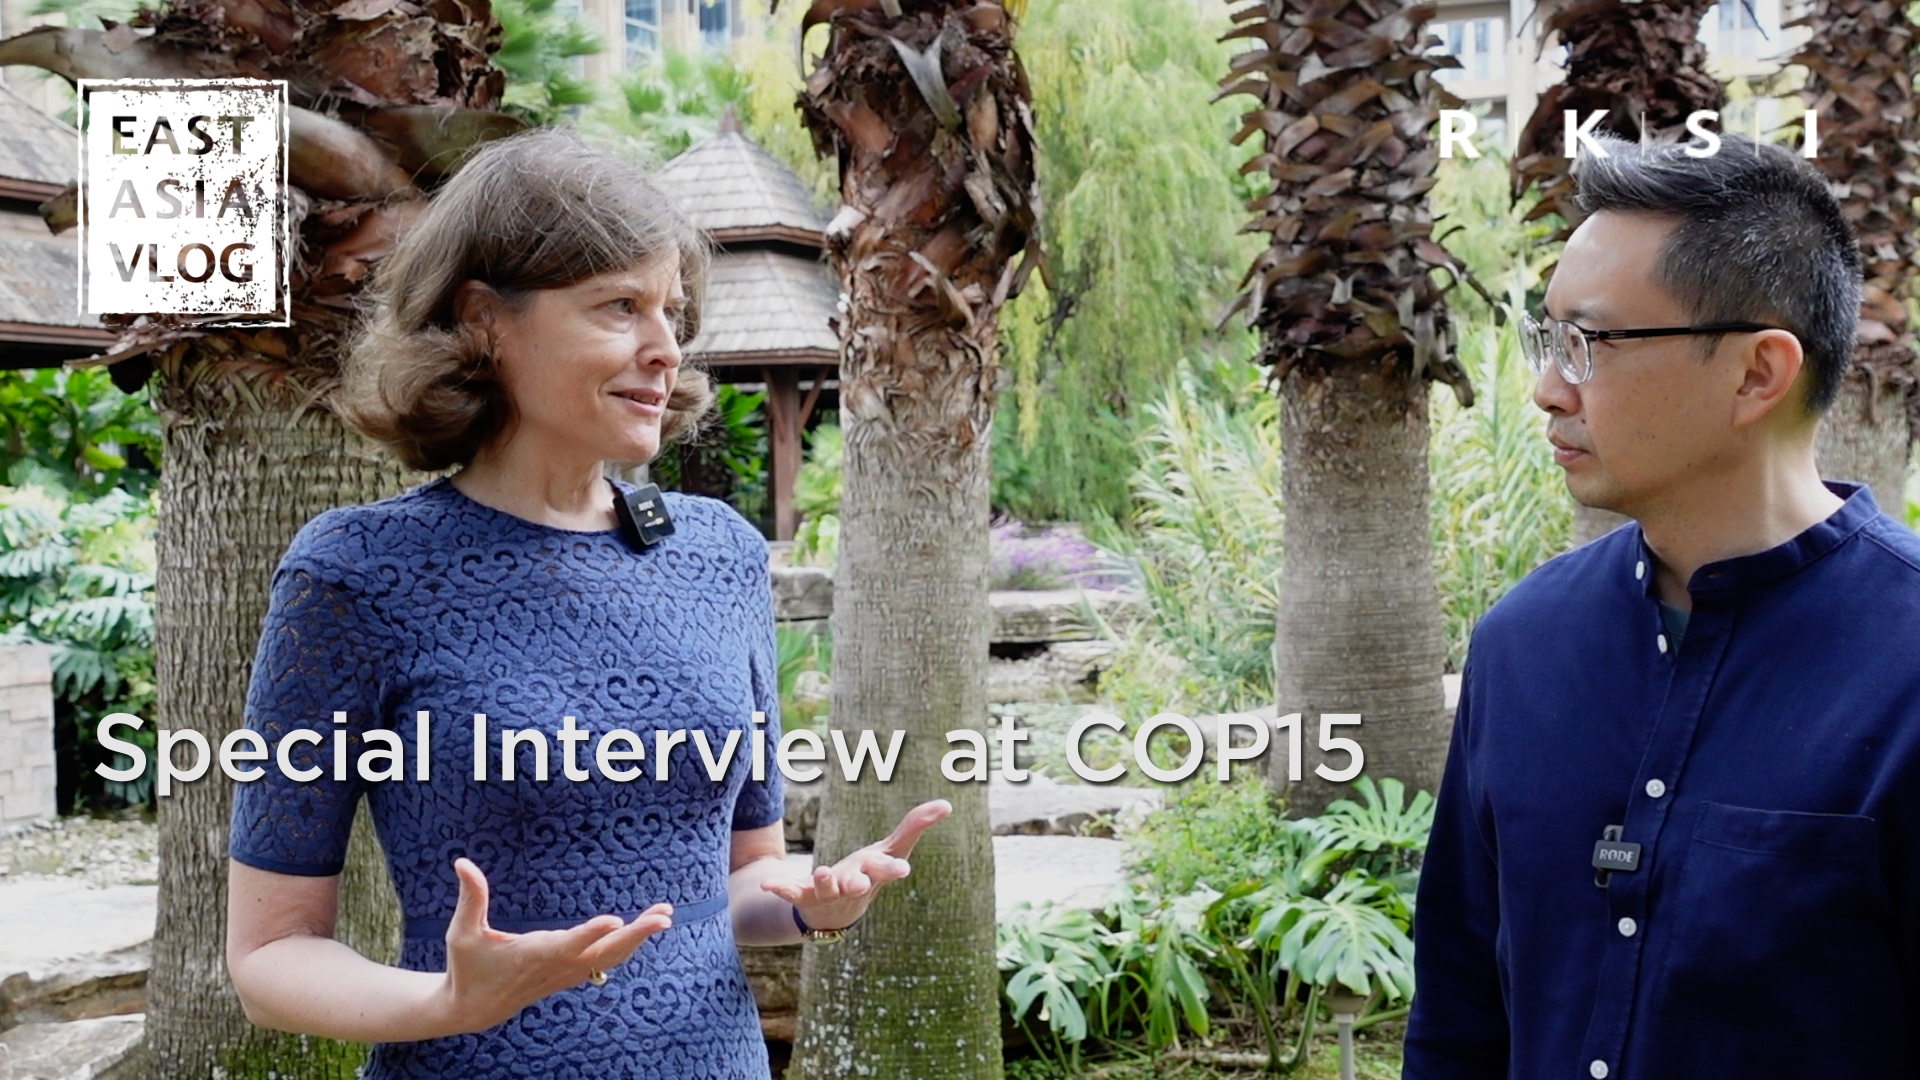 Mass Extinction of Species is Happening, Should We Care? Episode 2. Special Interview with Yolanda Fernandez Lommen at COP15